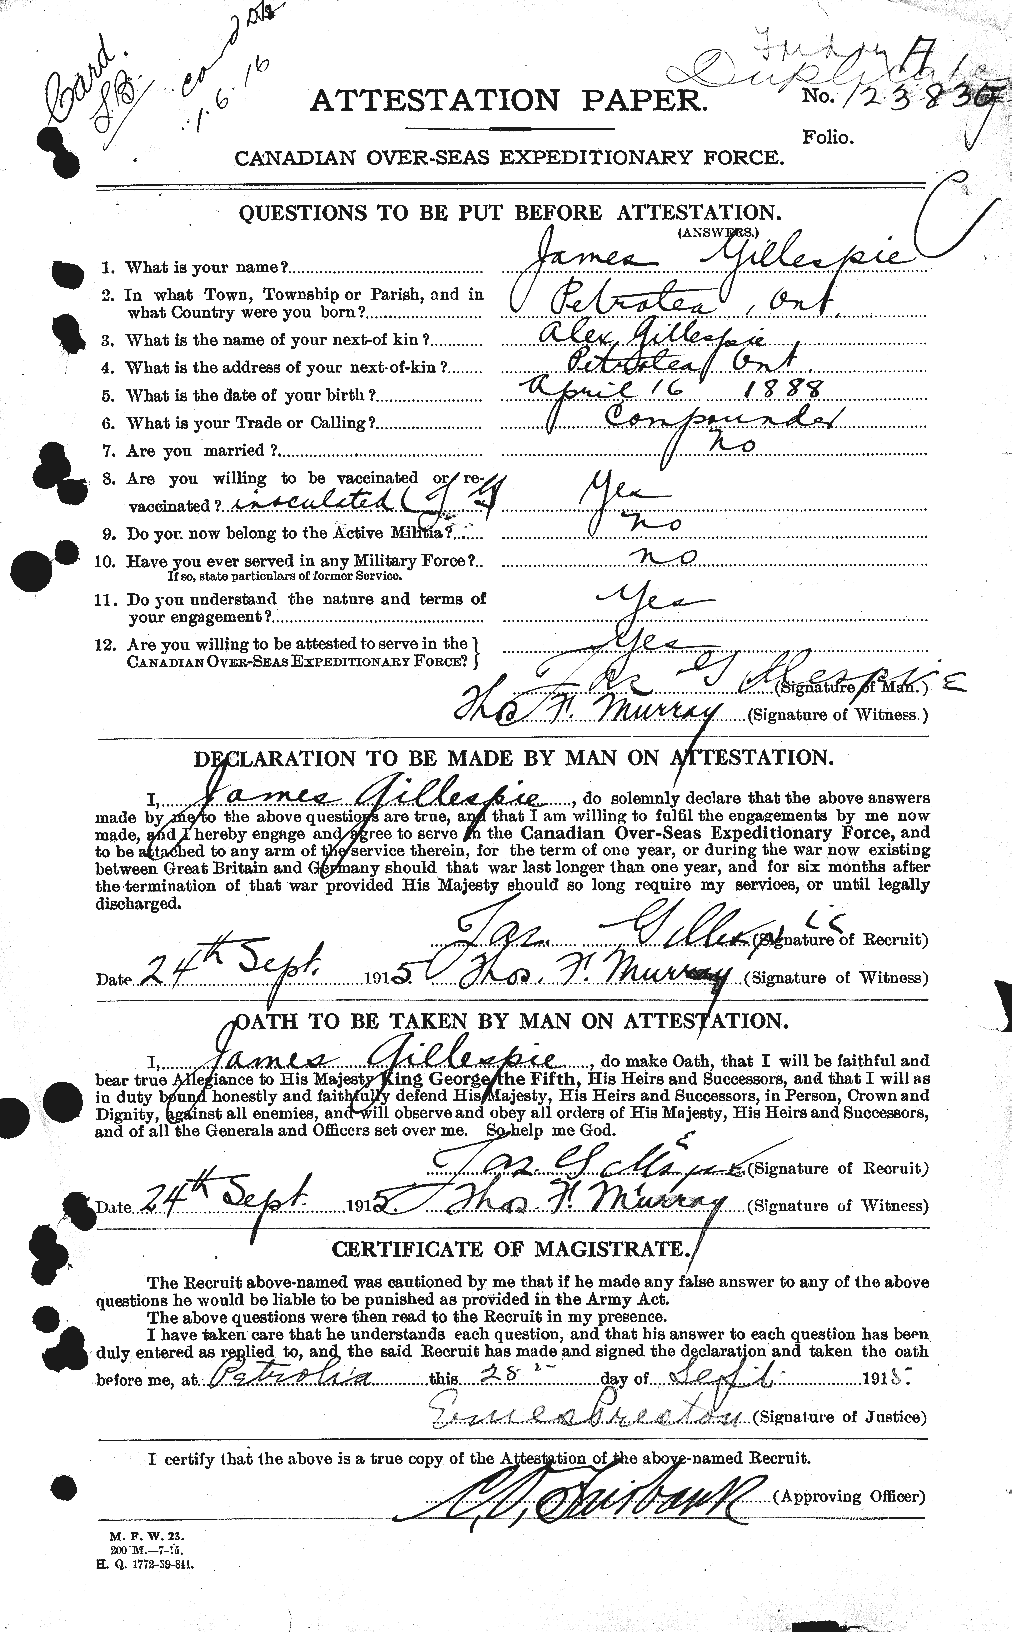 Personnel Records of the First World War - CEF 348796a